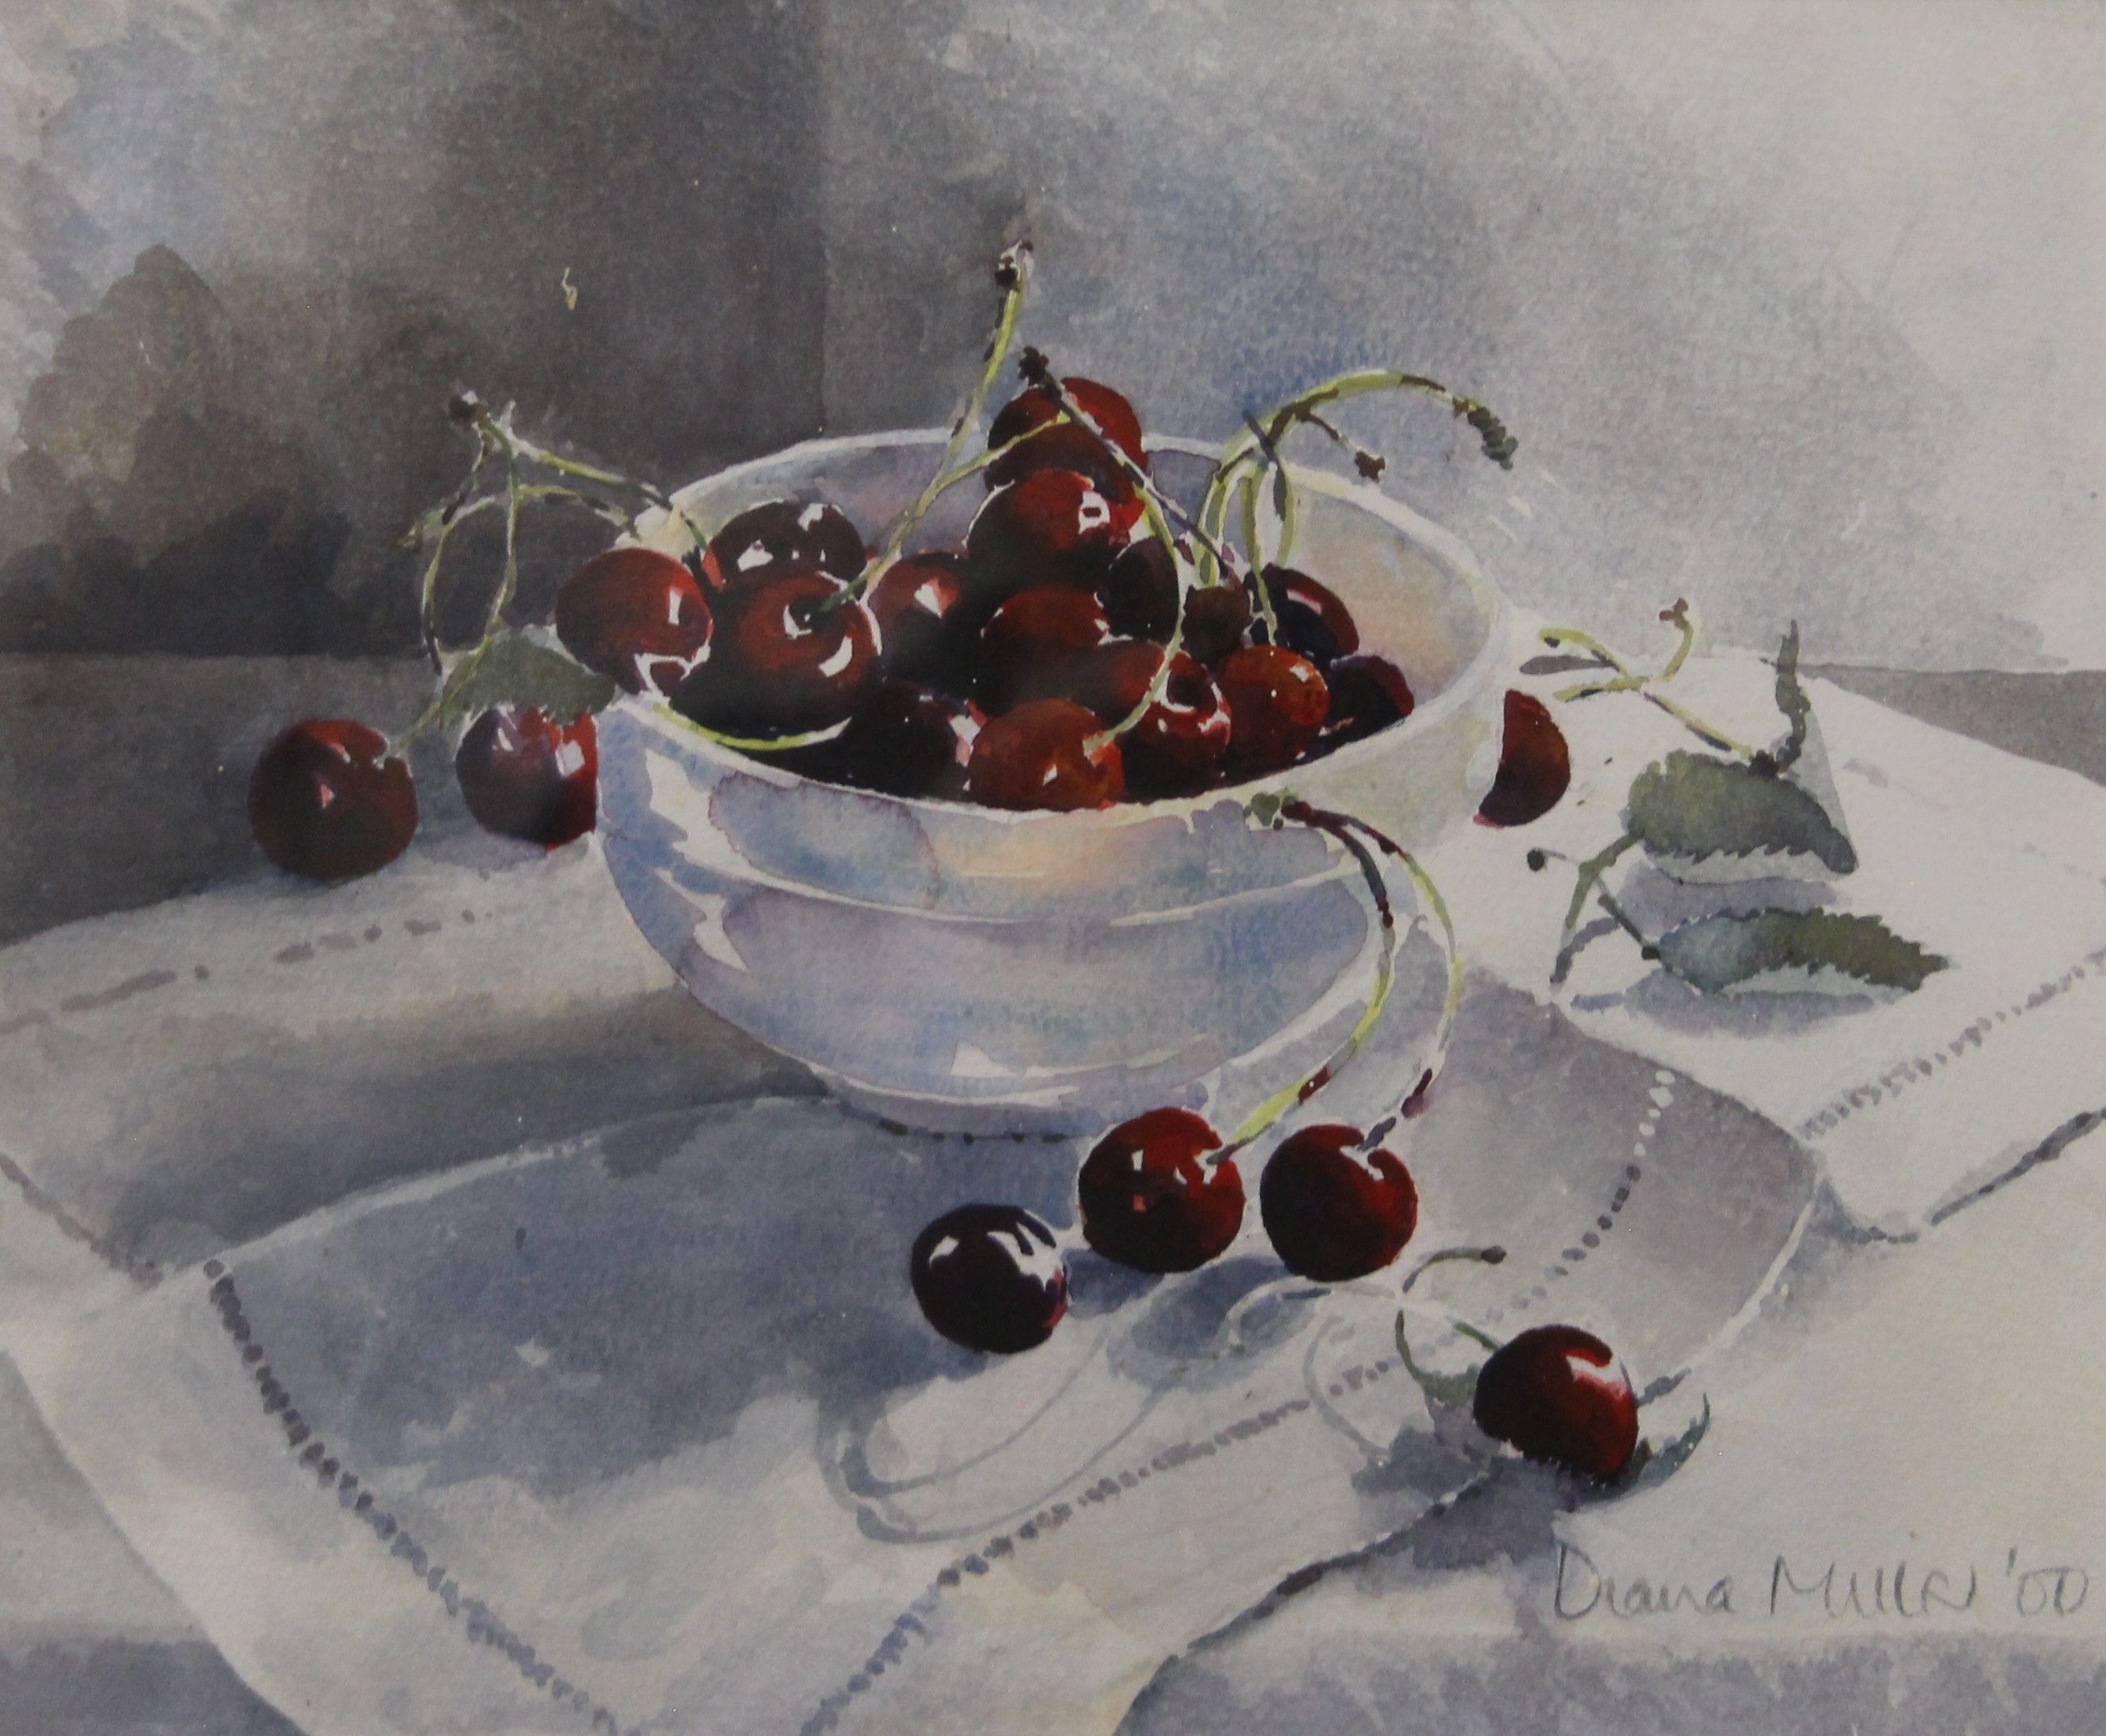 DIANA MILLER, Bowl of Cherries, watercolour, framed and glazed. 32 x 25.5 cm.